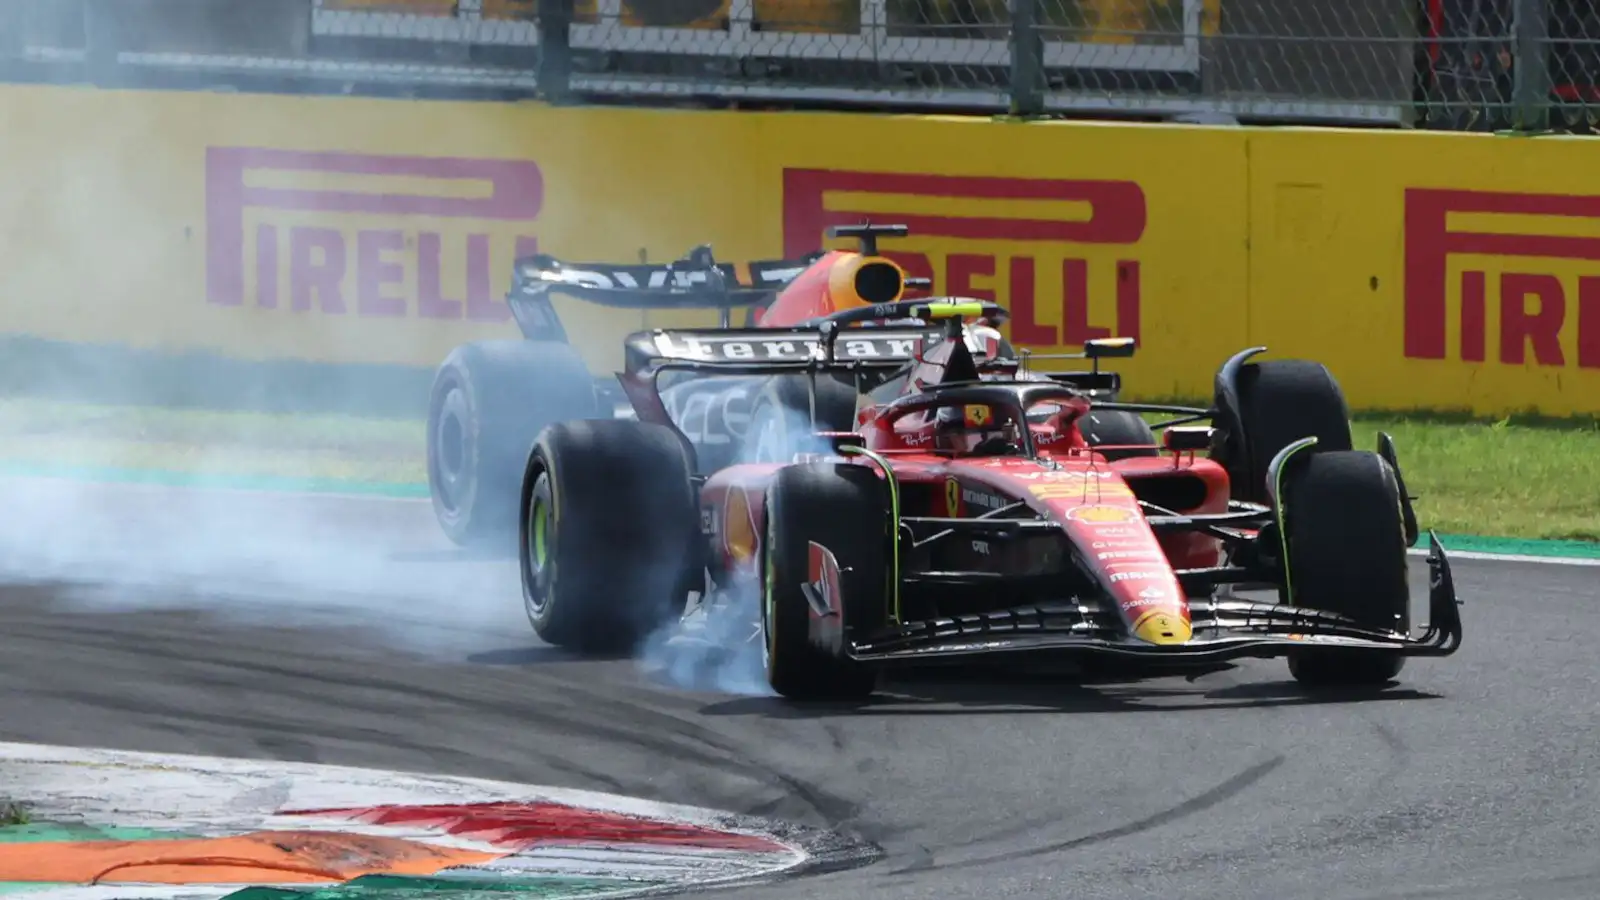 Ferrari driver Carlos Sainz and the Red Bull of Max Verstappen fighting for position at the Italian Grand Prix.